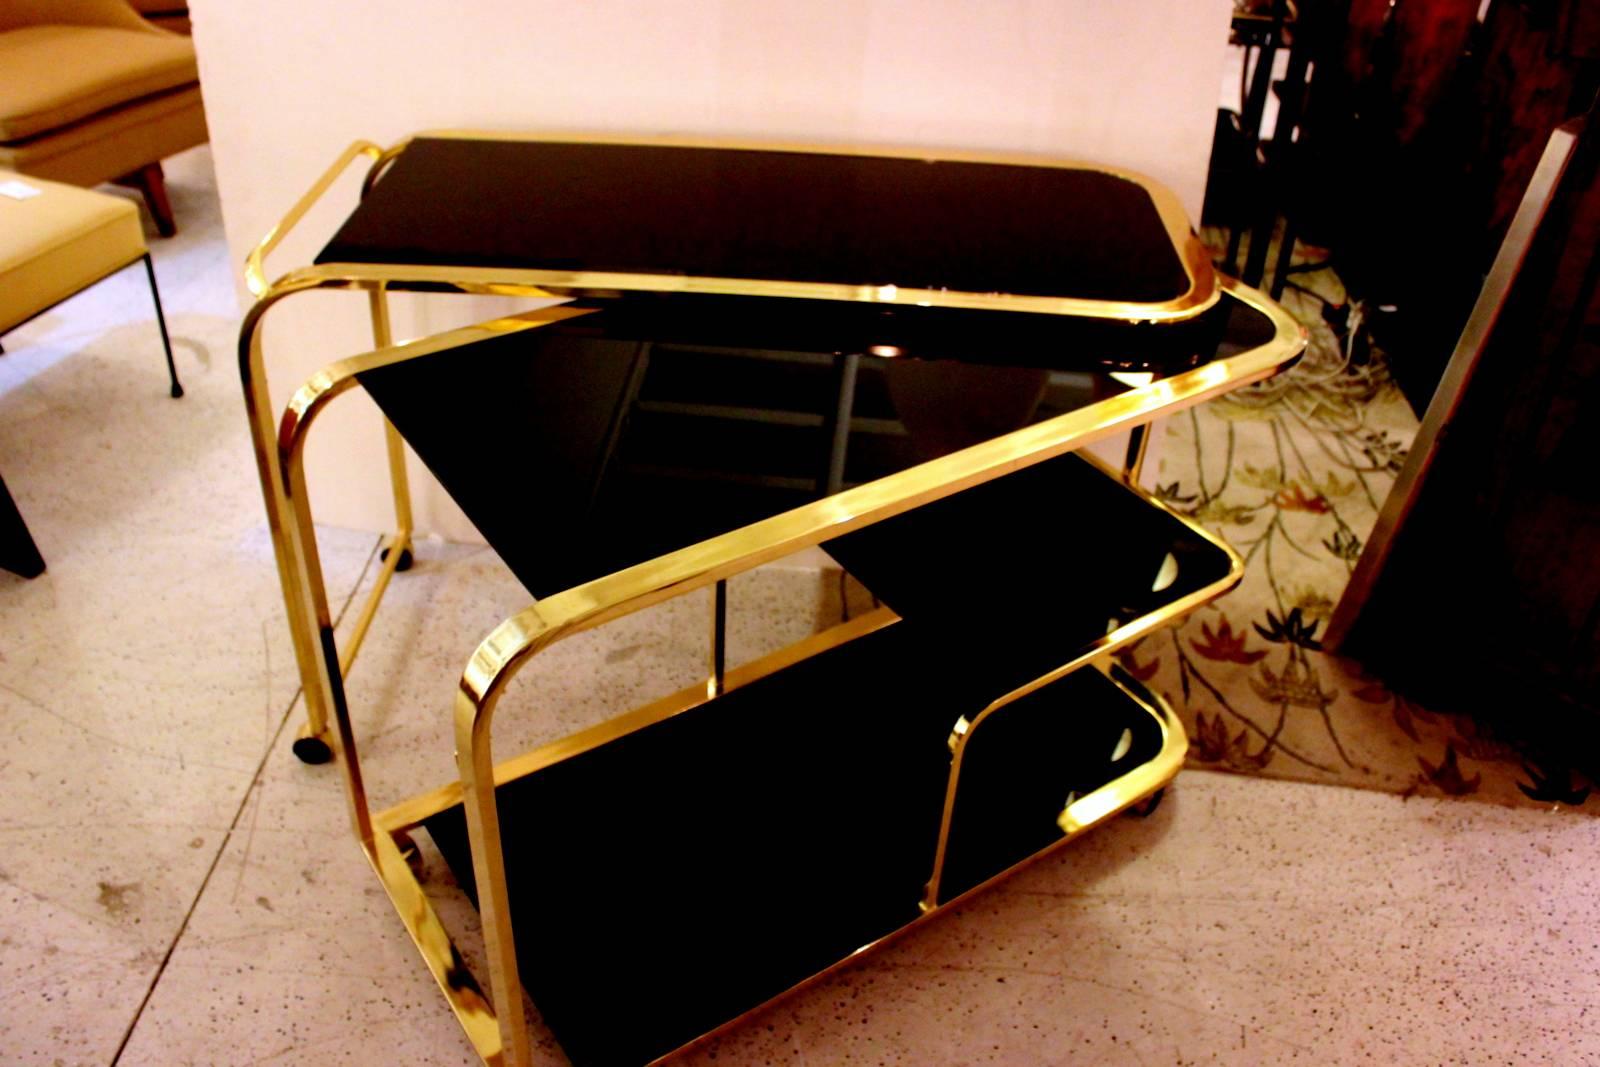 An exceptional, expandable, brass and black glass bar or tea cart by Milo Baughman for Design Institute of America, circa 1970. Double the space for serving.
Opens to 7 feet. With brass casters.